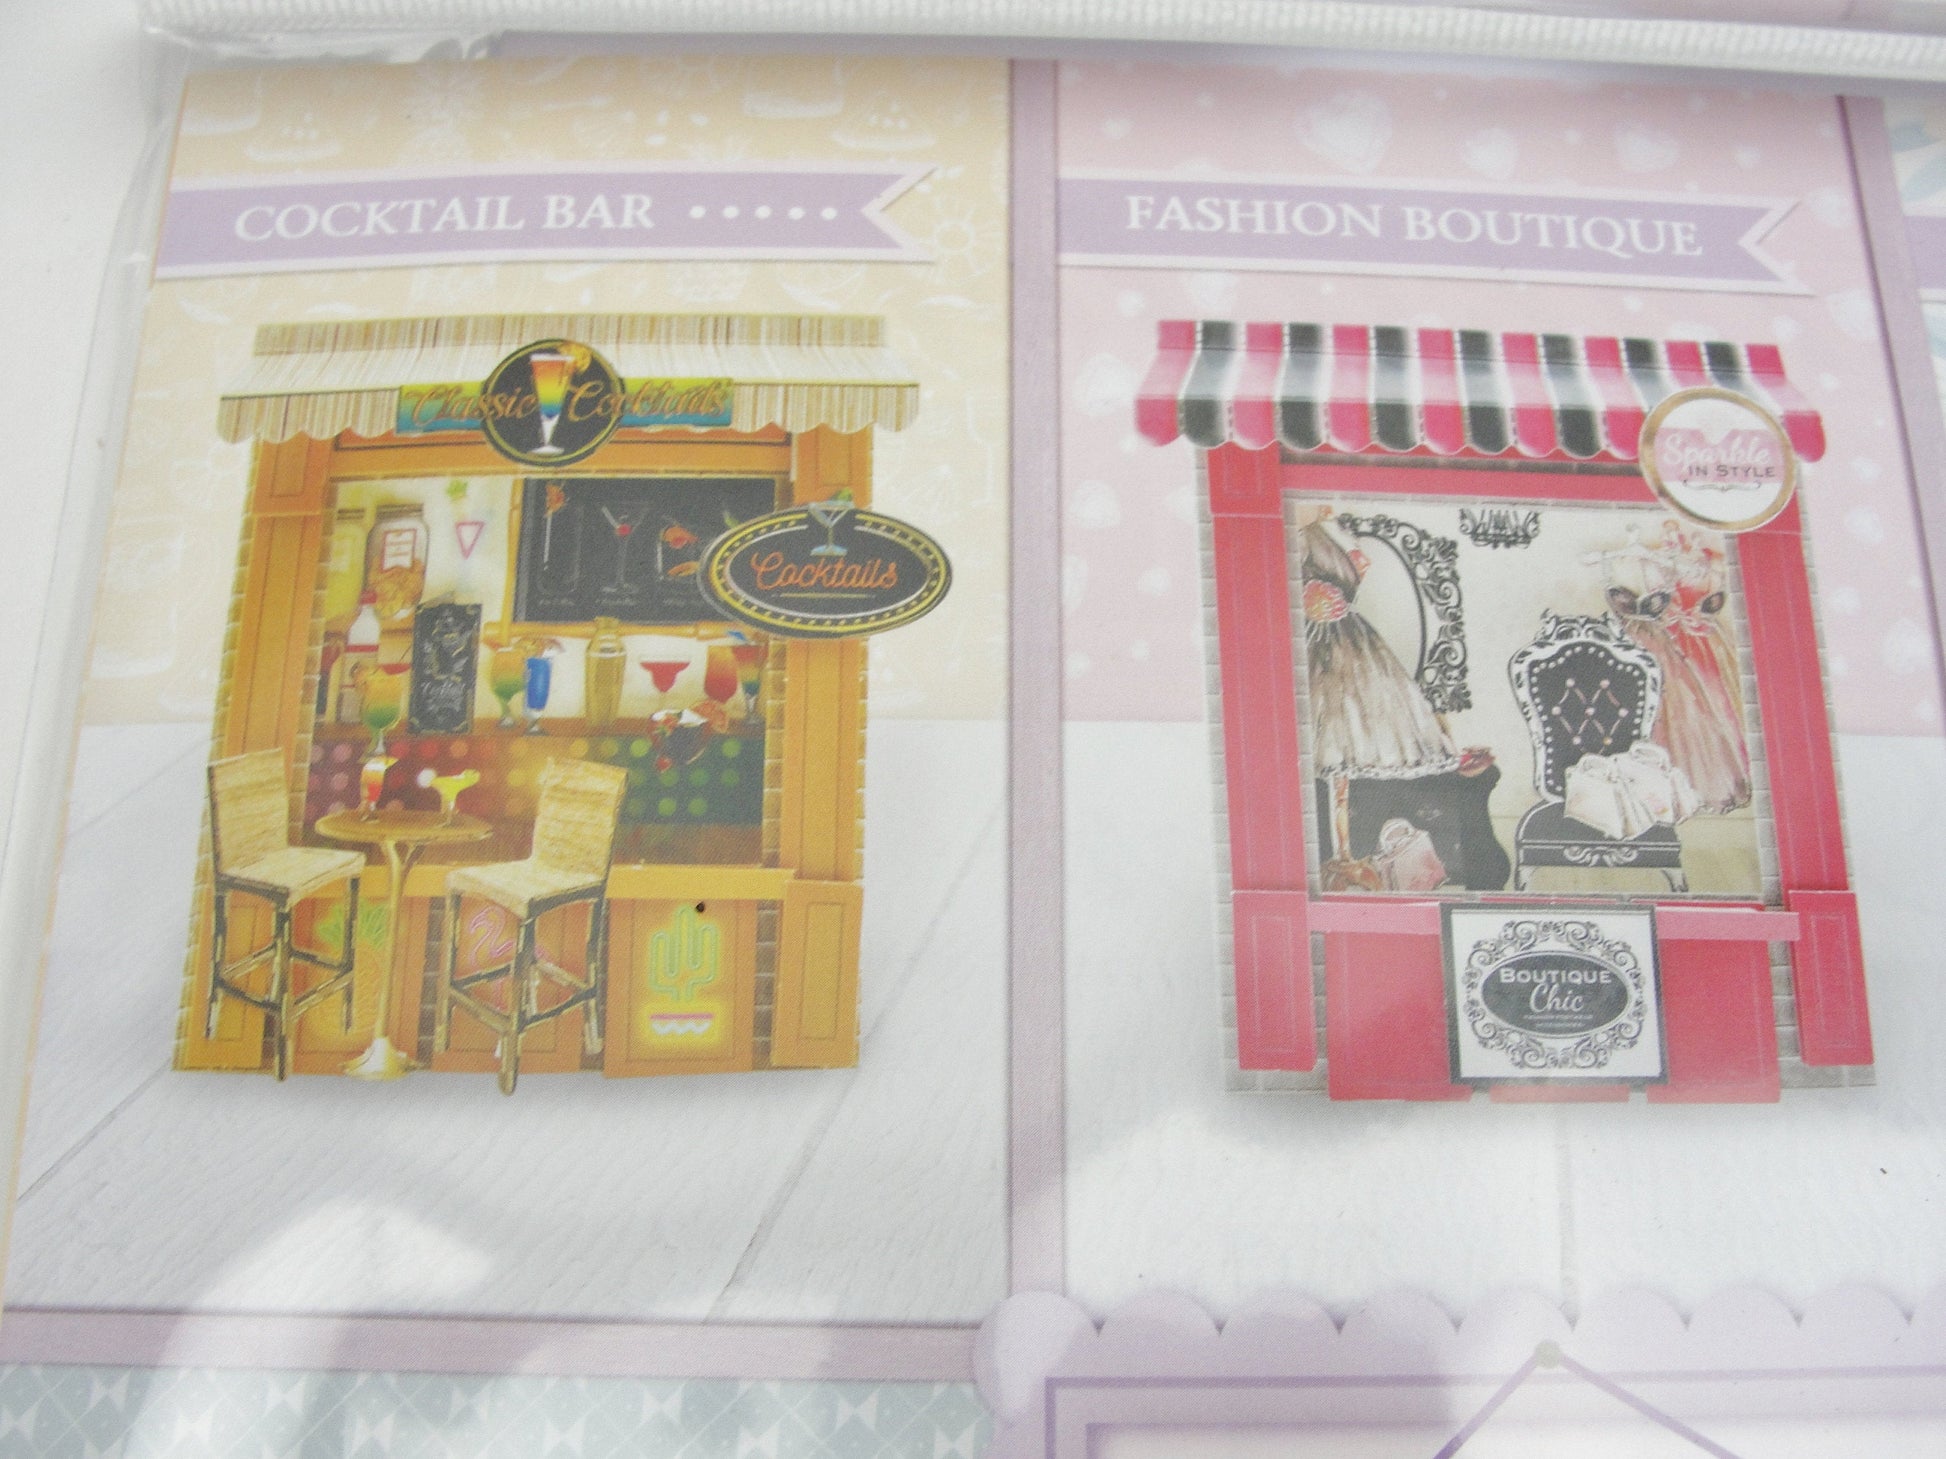 Hunkydory Highstreet for Her card making kit makes 8 cards - Mixed Media Art Supplies - Craft Supply House